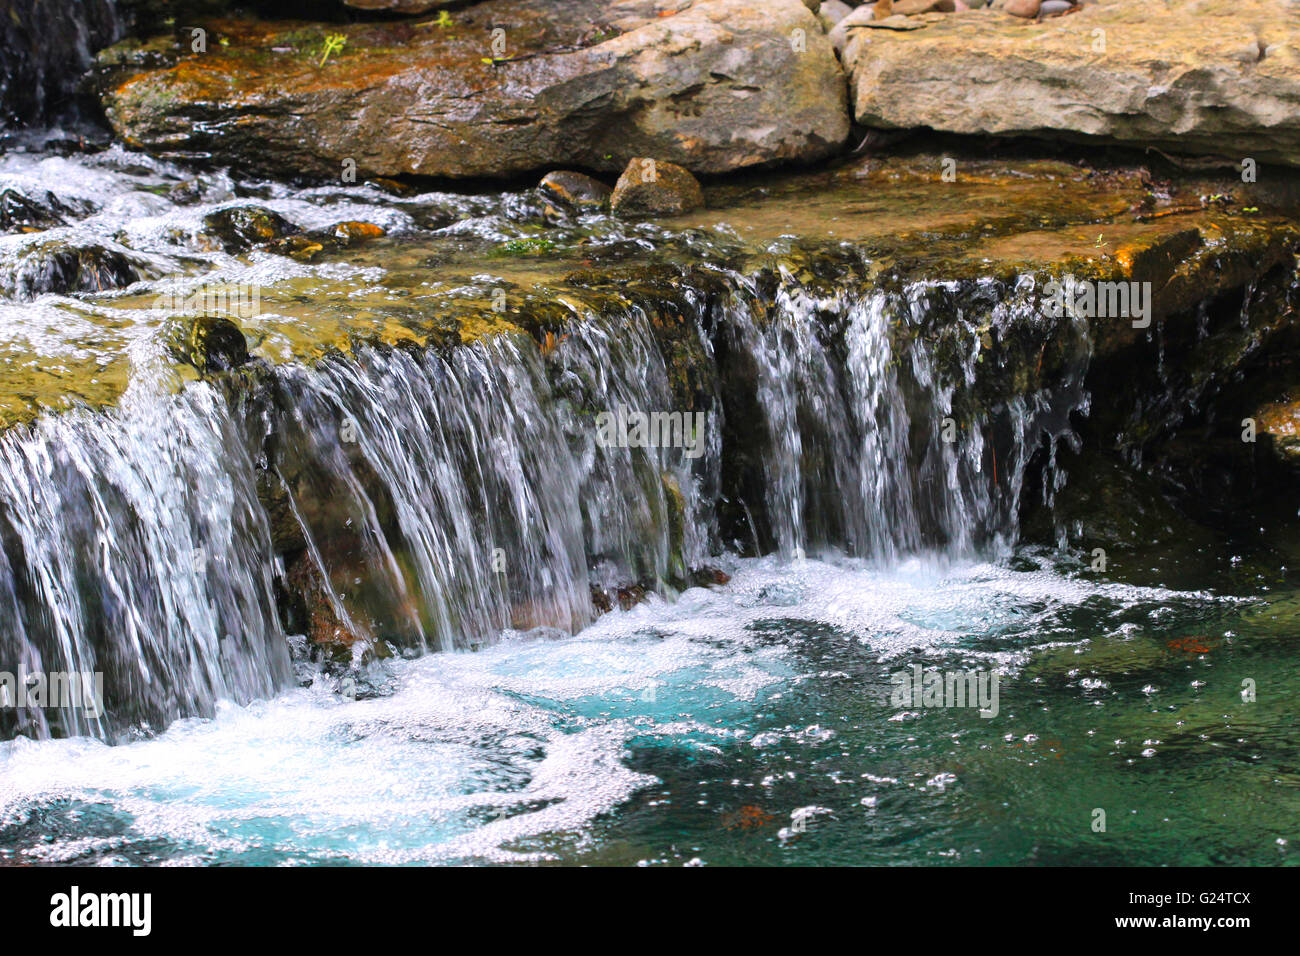 A garden pond supports a multi-tiered waterfall with many layers of rock slabs. Stock Photo